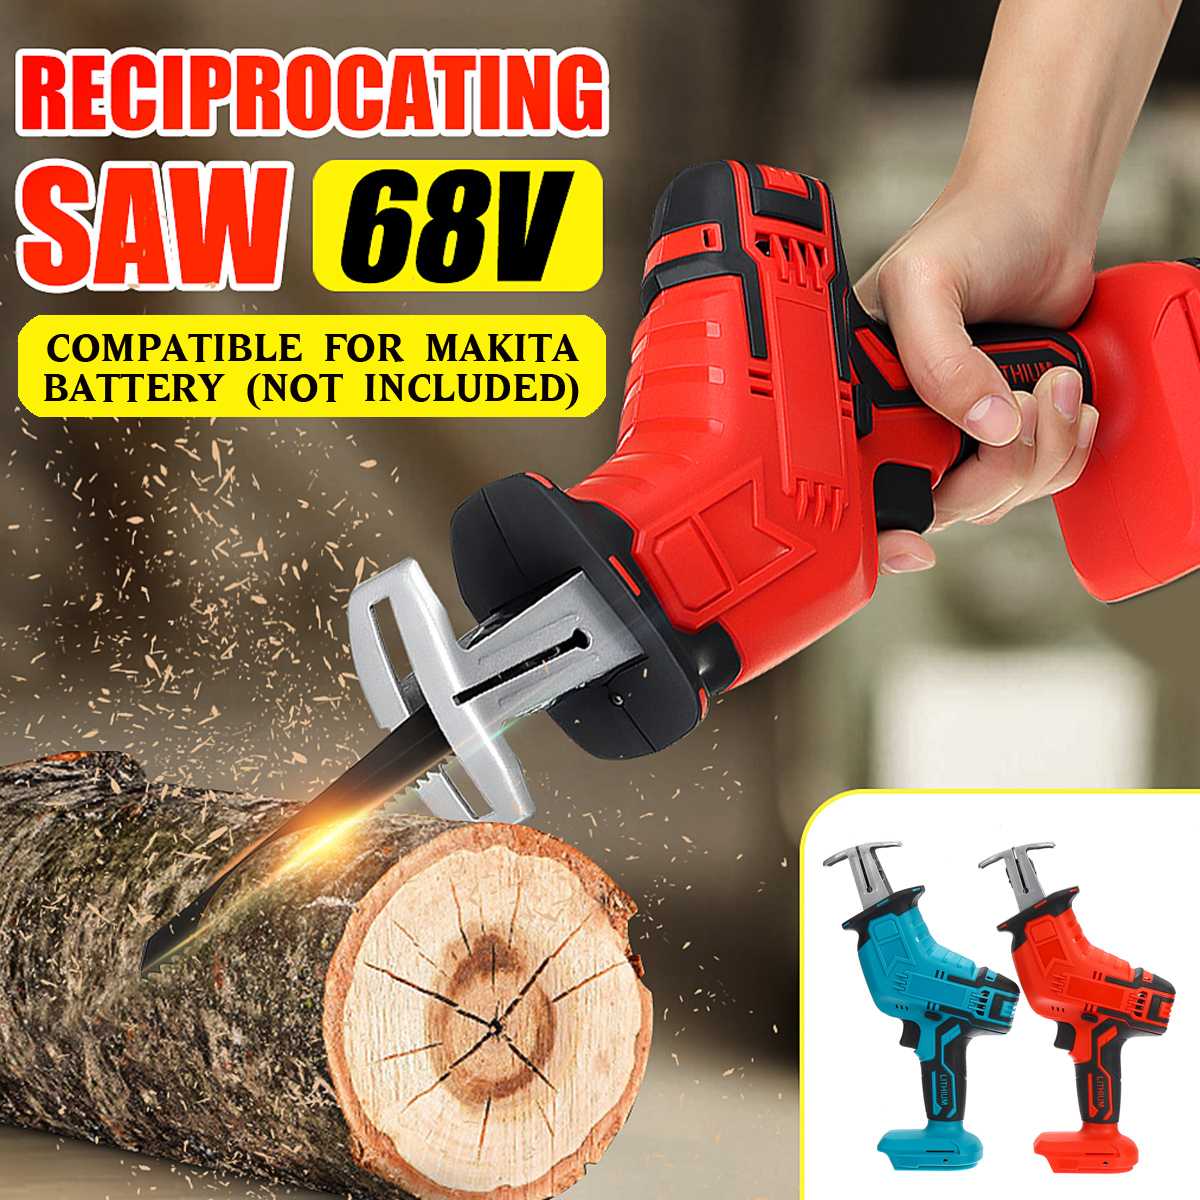 For Makita 68V Electric Reciprocating Saw LED Light Outdoor Woodworking Cordless Portable Saw Unit (Battery Blades not included)